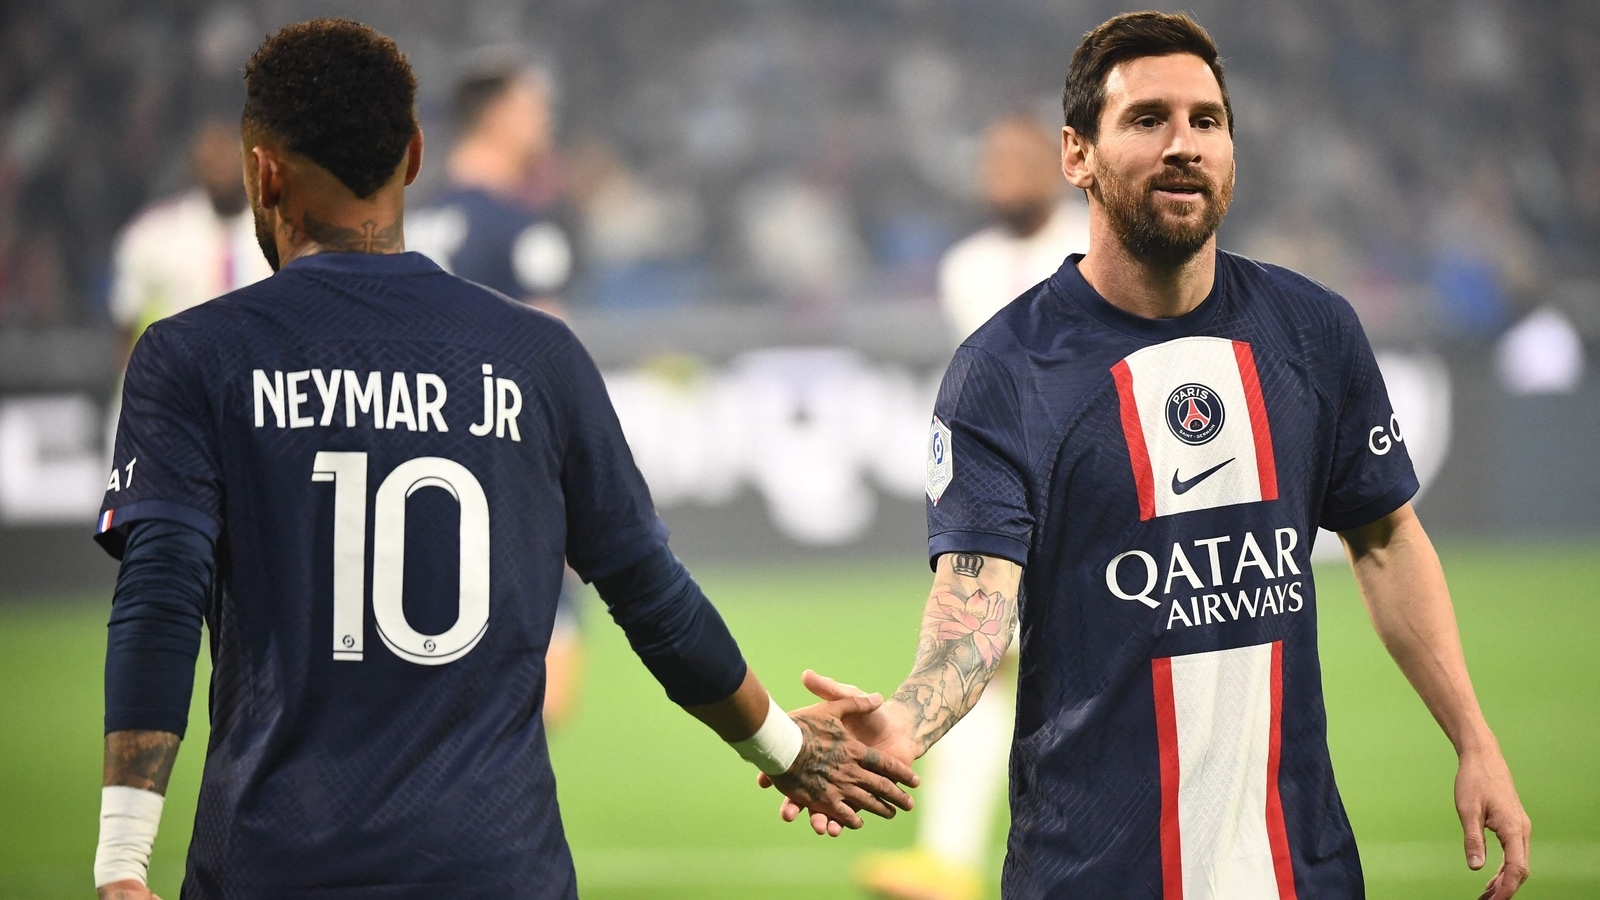 Is Lionel Messi playing for PSG against Marseille today?